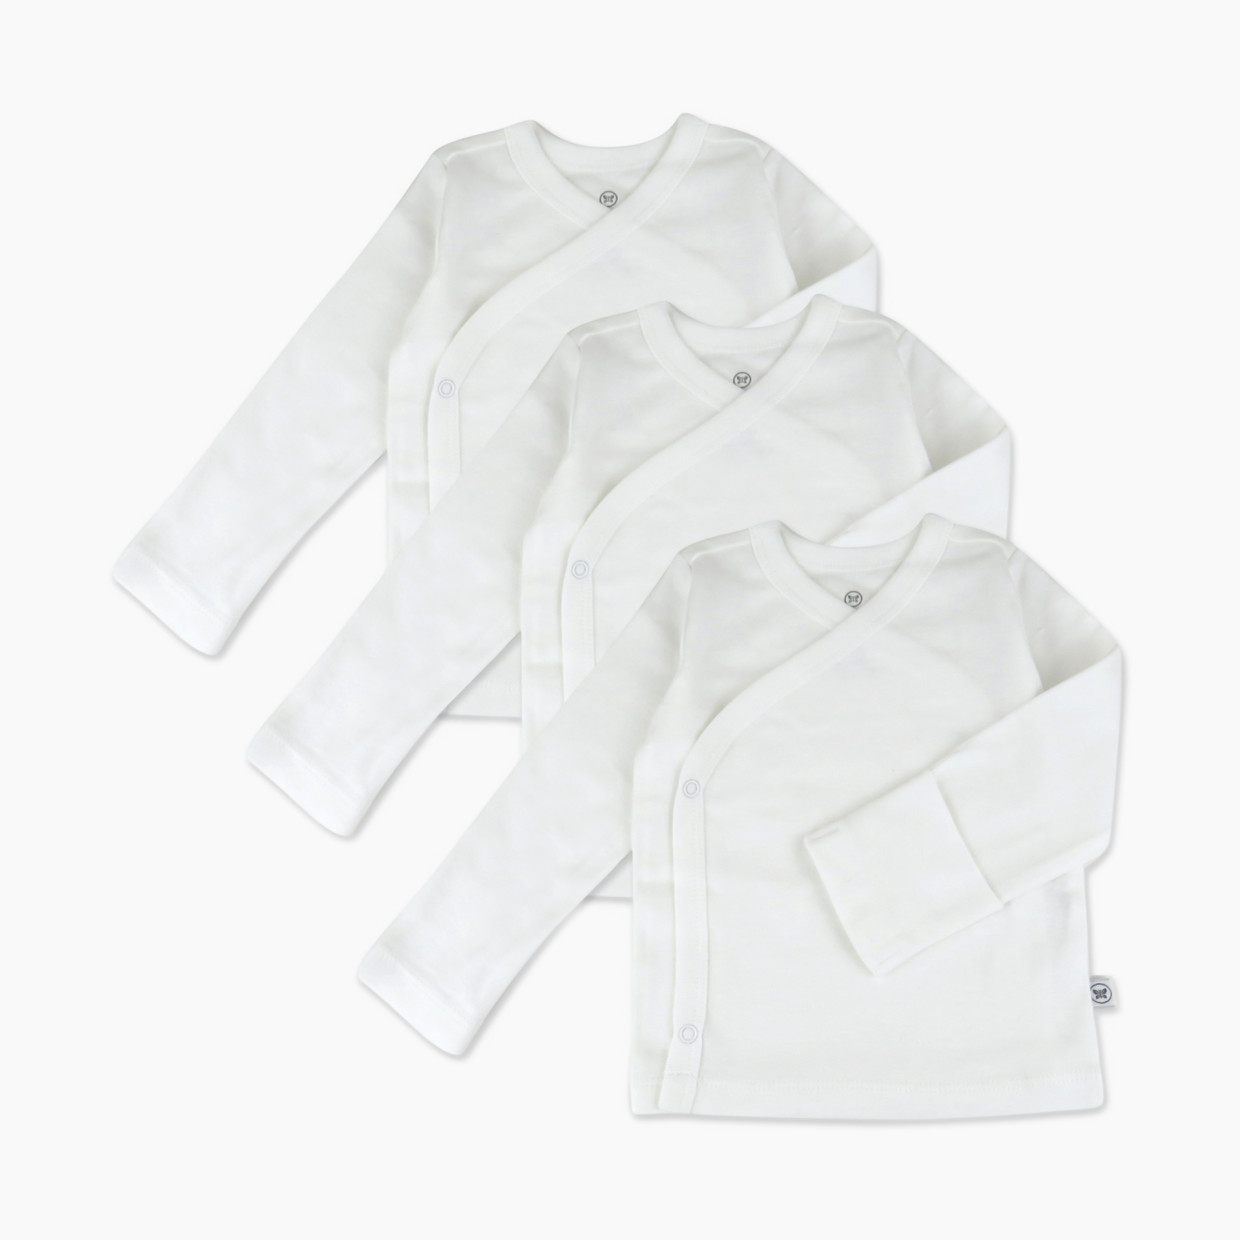 Honest Baby Clothing 3-Pack Organic Cotton Long Sleeve Side-Snap Tops - Bright White, Nb.